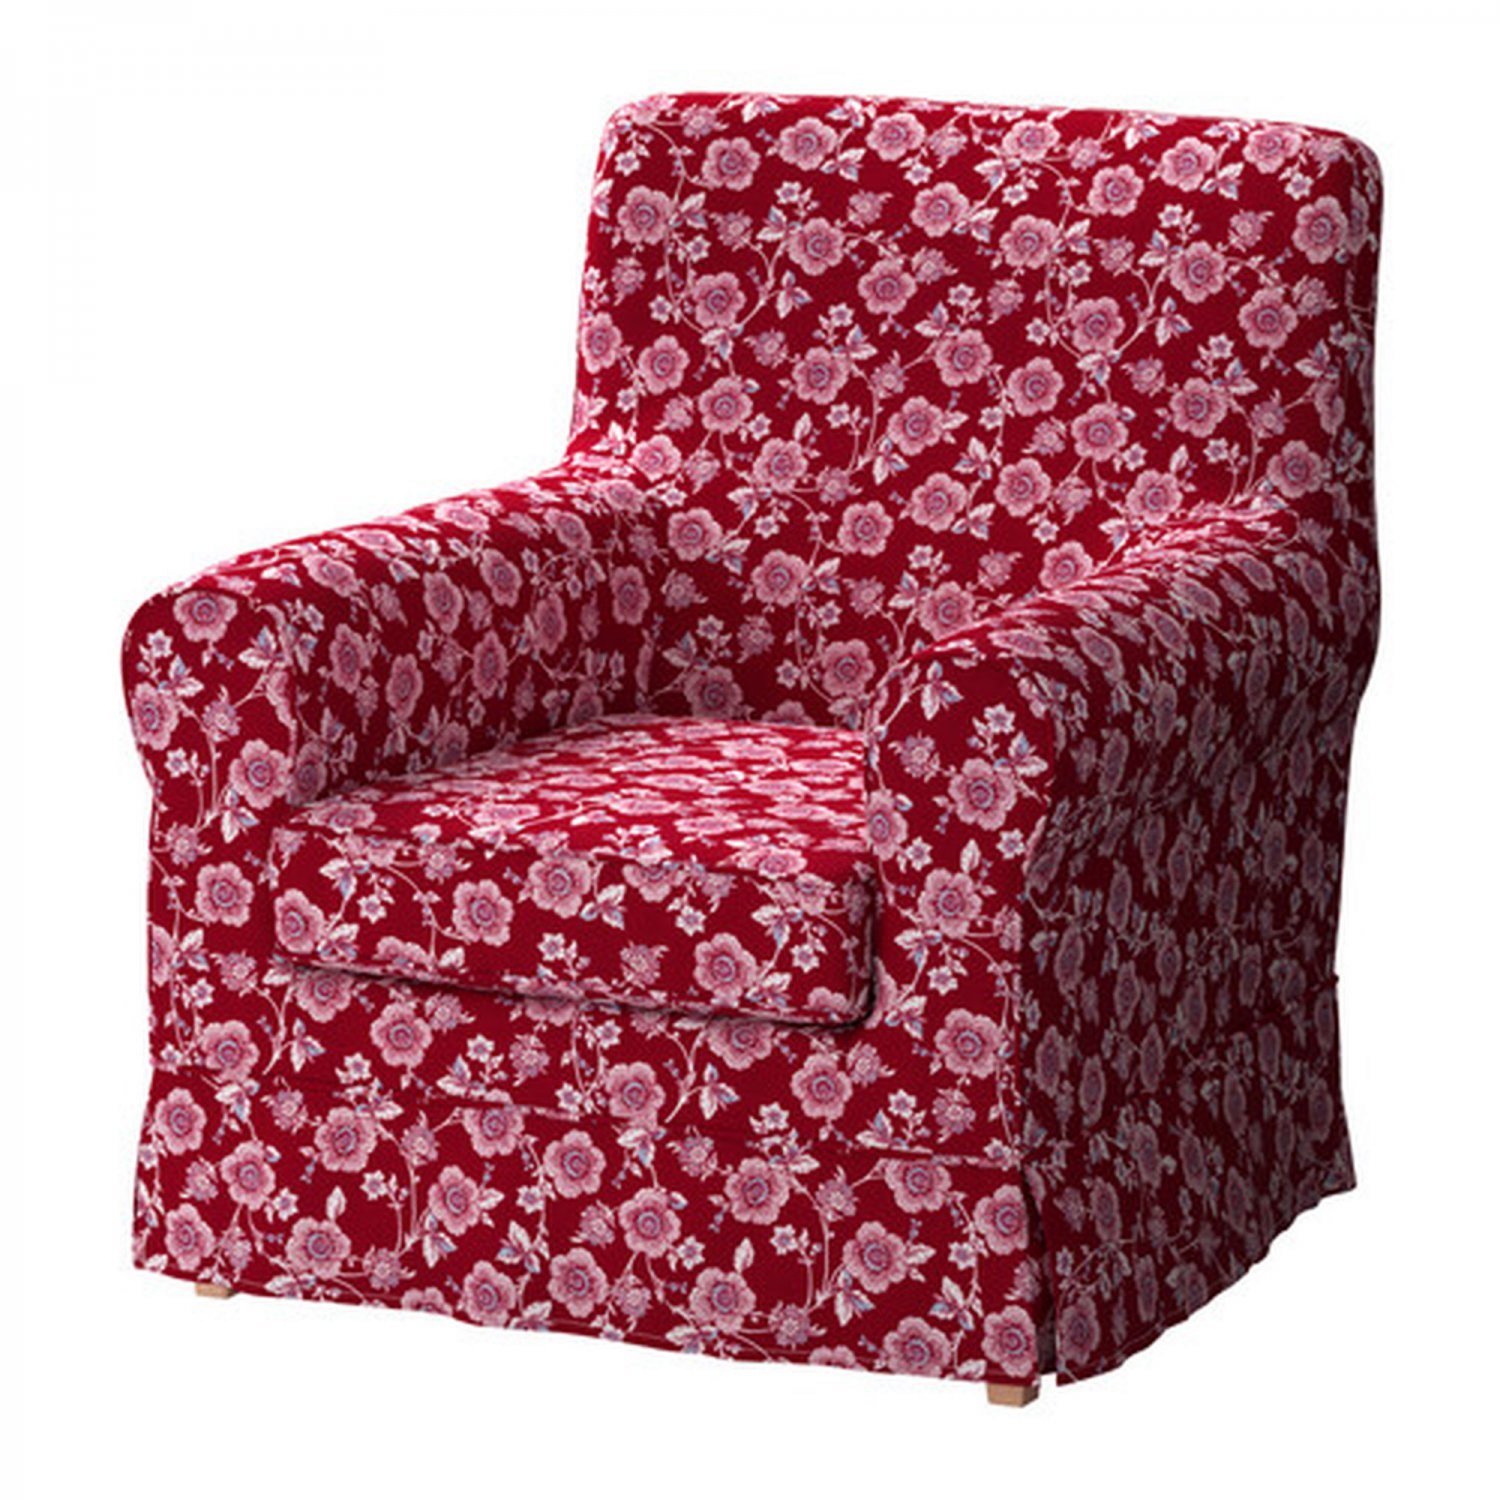 IKEA Ektorp JENNYLUND Armchair SLIPCOVER Cover BRUNFLO RED White FLORAL